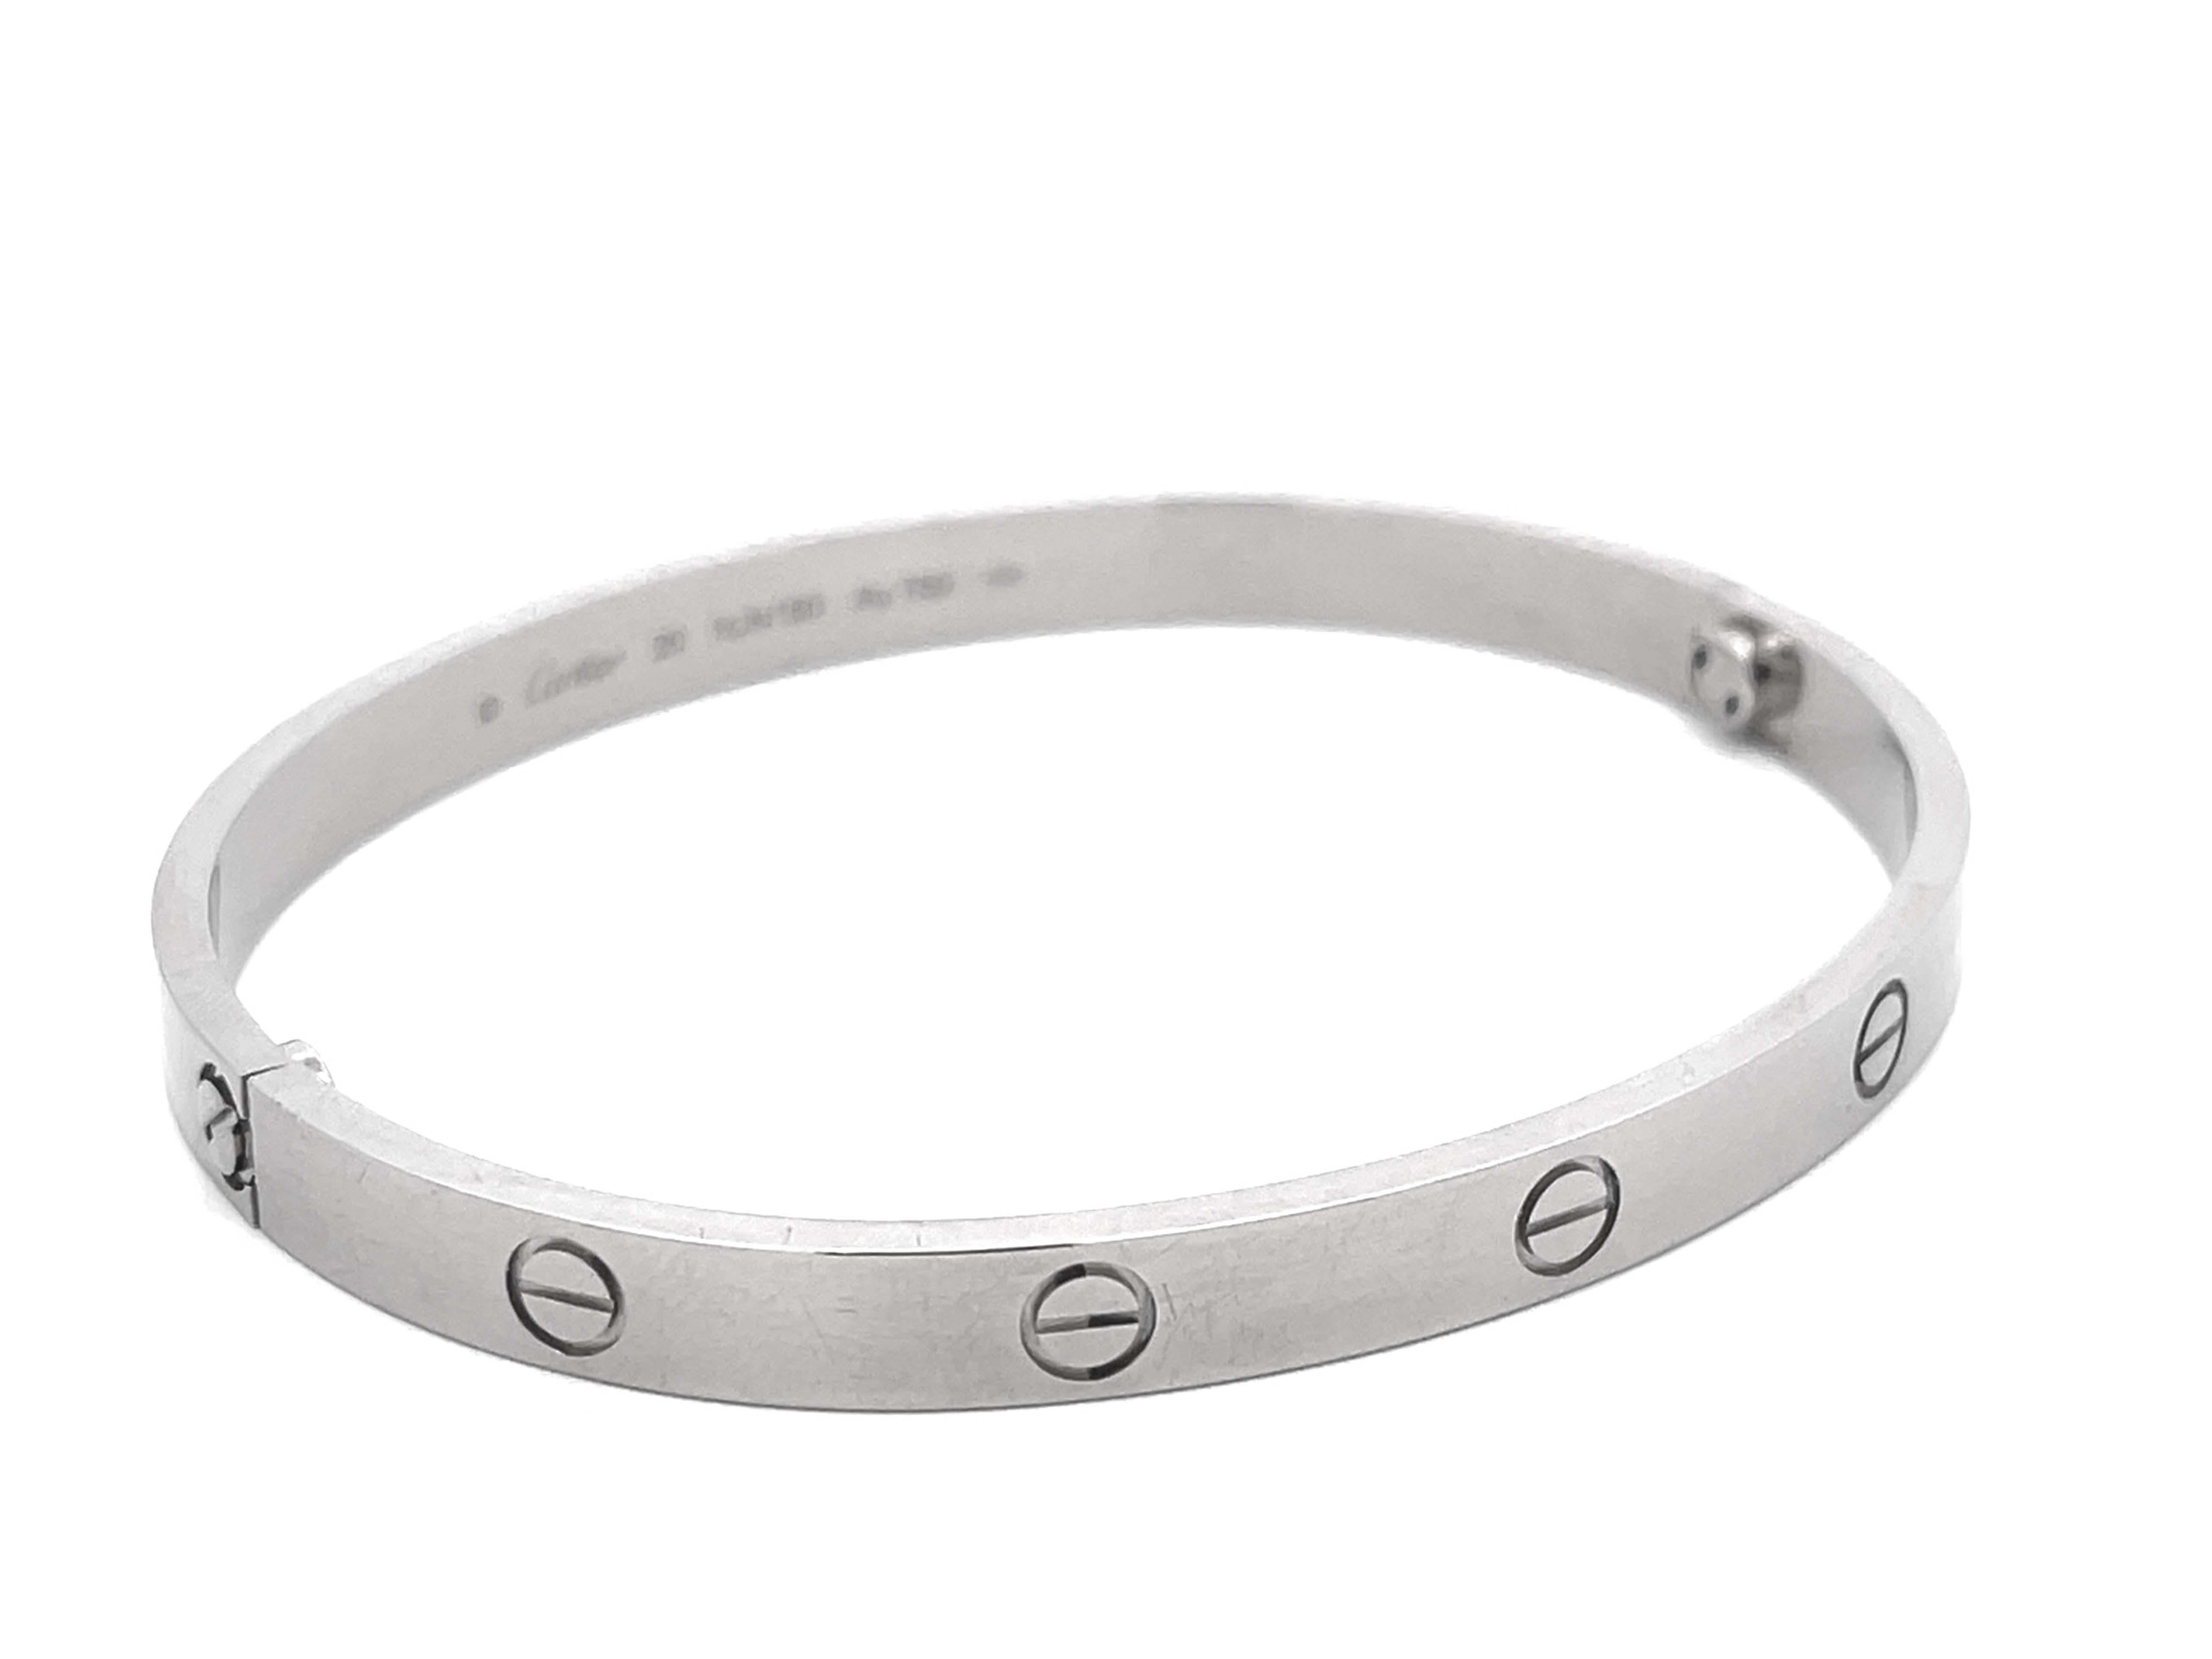 Cartier Love Bracelet 18K White Gold Size 20 In Excellent Condition For Sale In Honolulu, HI